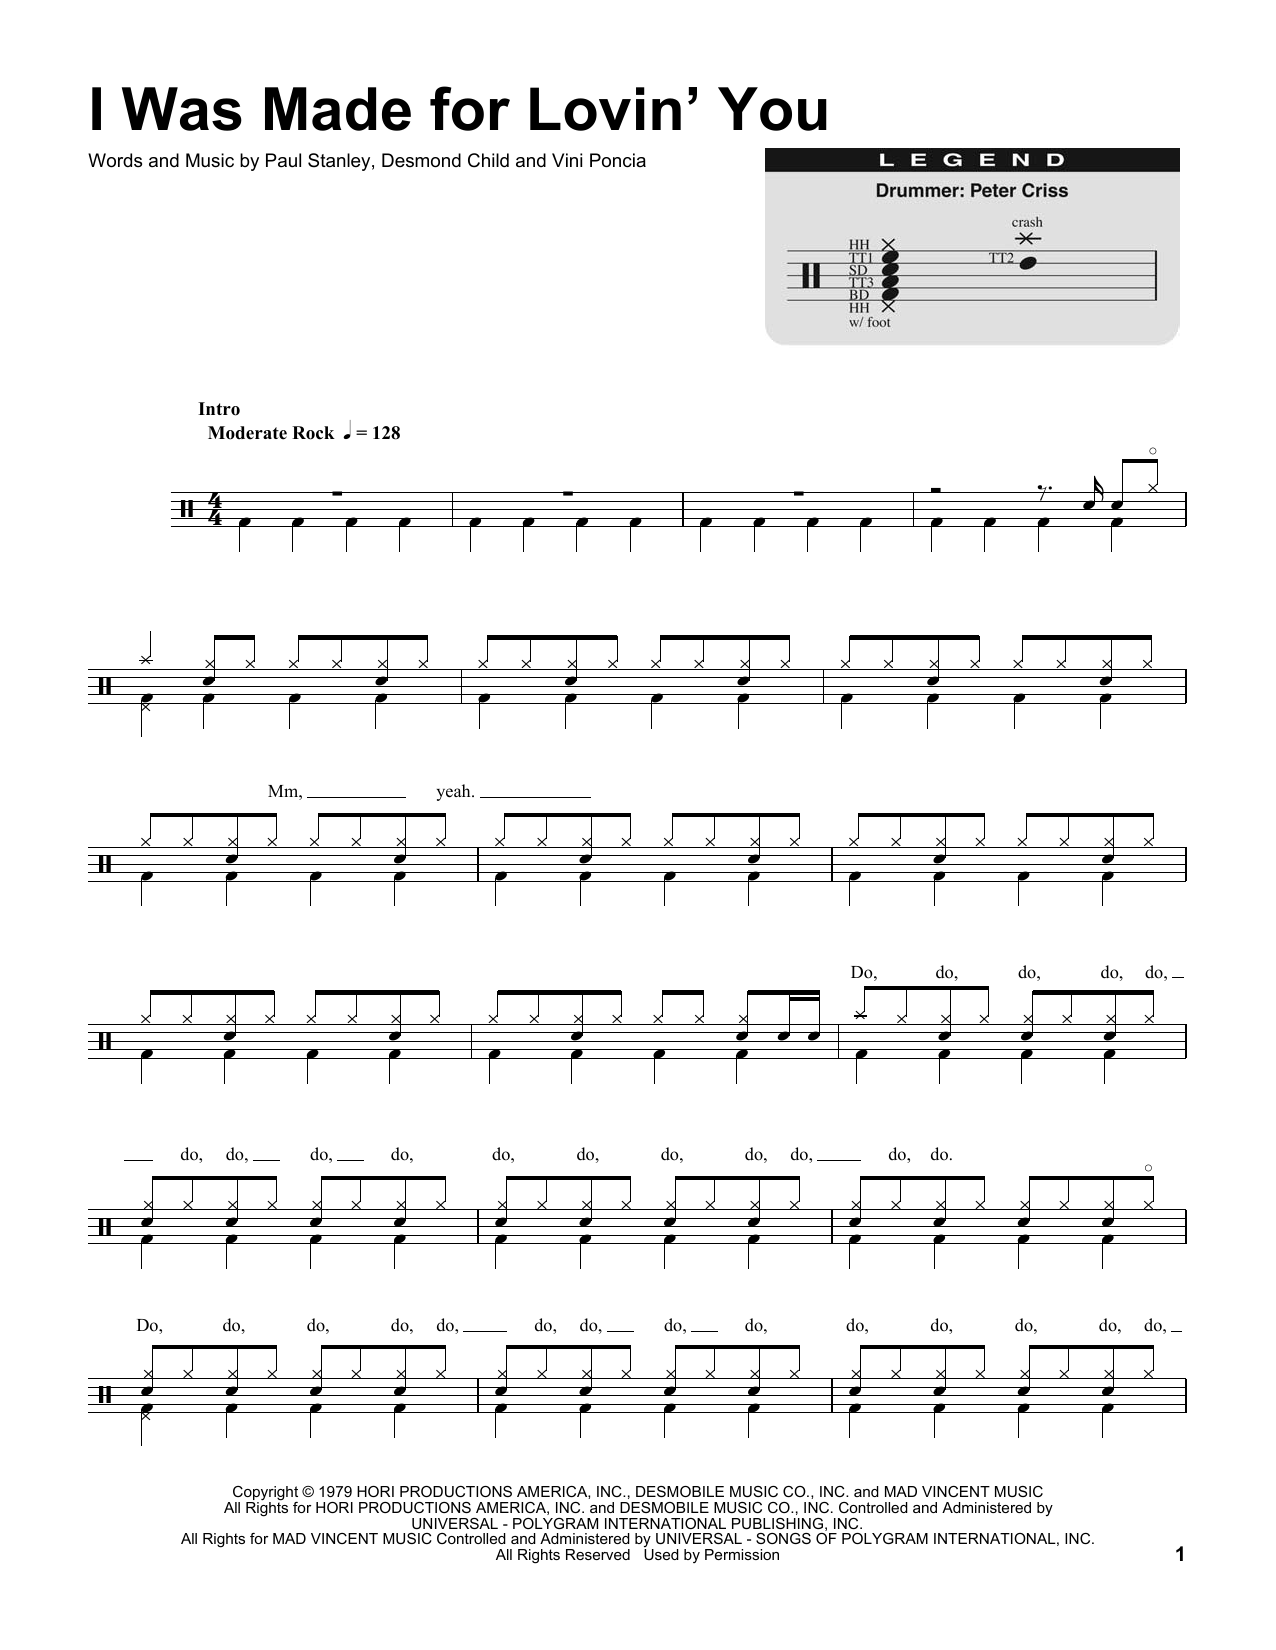 Download KISS I Was Made For Lovin' You Sheet Music